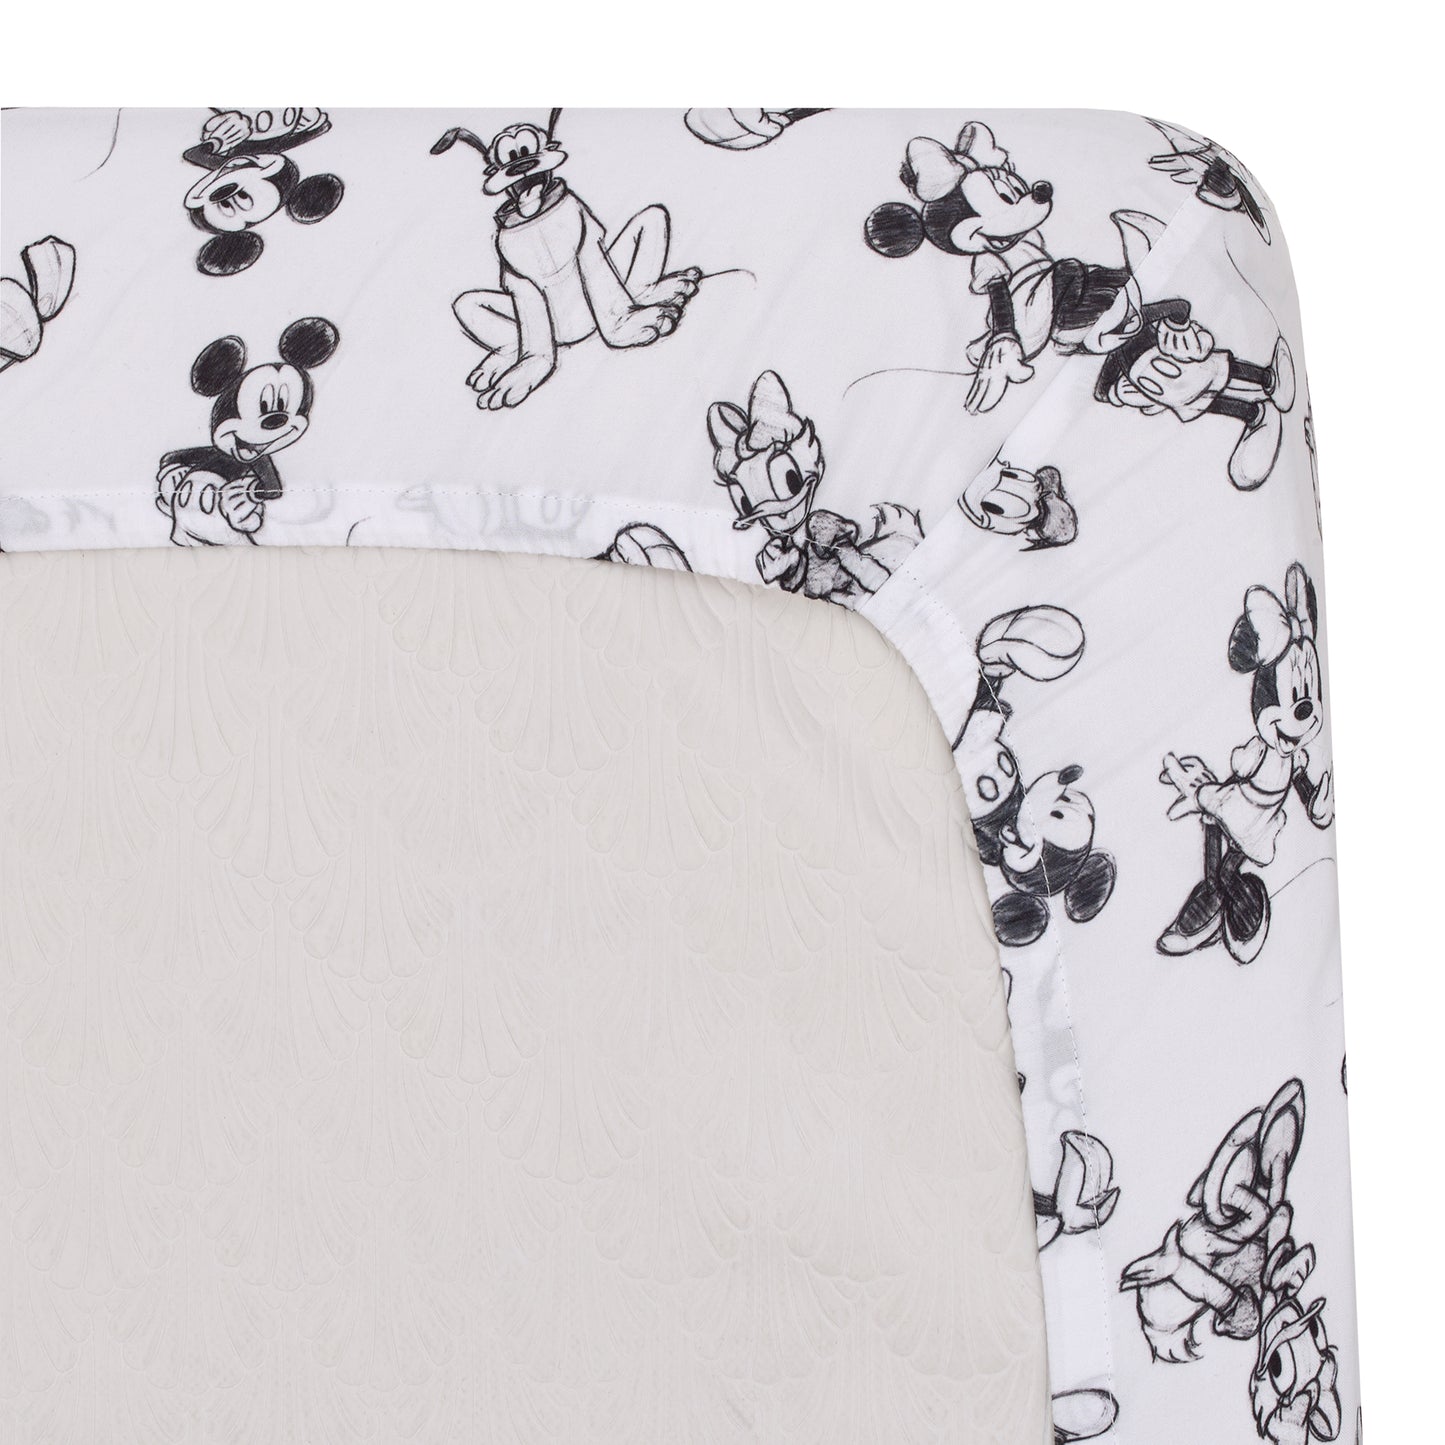 Disney Mickey Mouse - Charcoal, Black and White Mickey and Friends, Minnie Mouse, Donald Duck and Pluto Nursery Fitted Crib Sheet